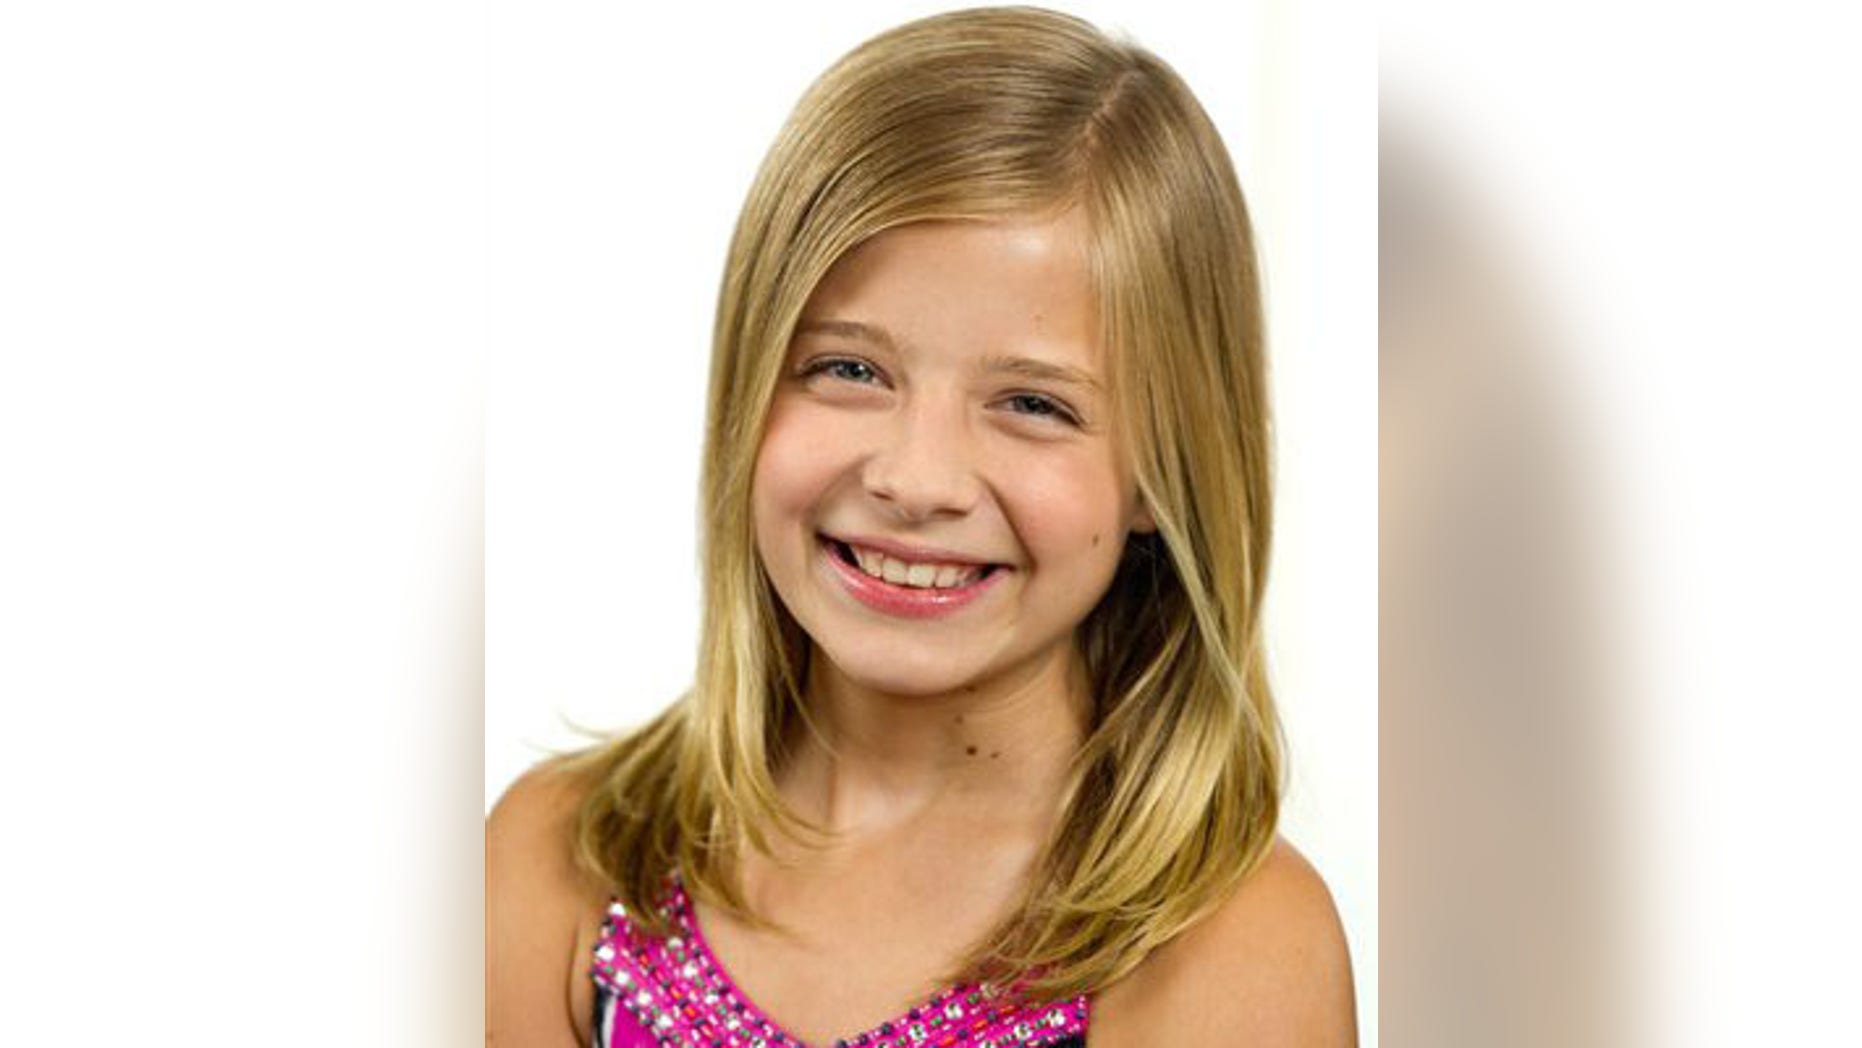 11 Year Old Americas Got Talent Runner Up Jackie Evancho Has Hit